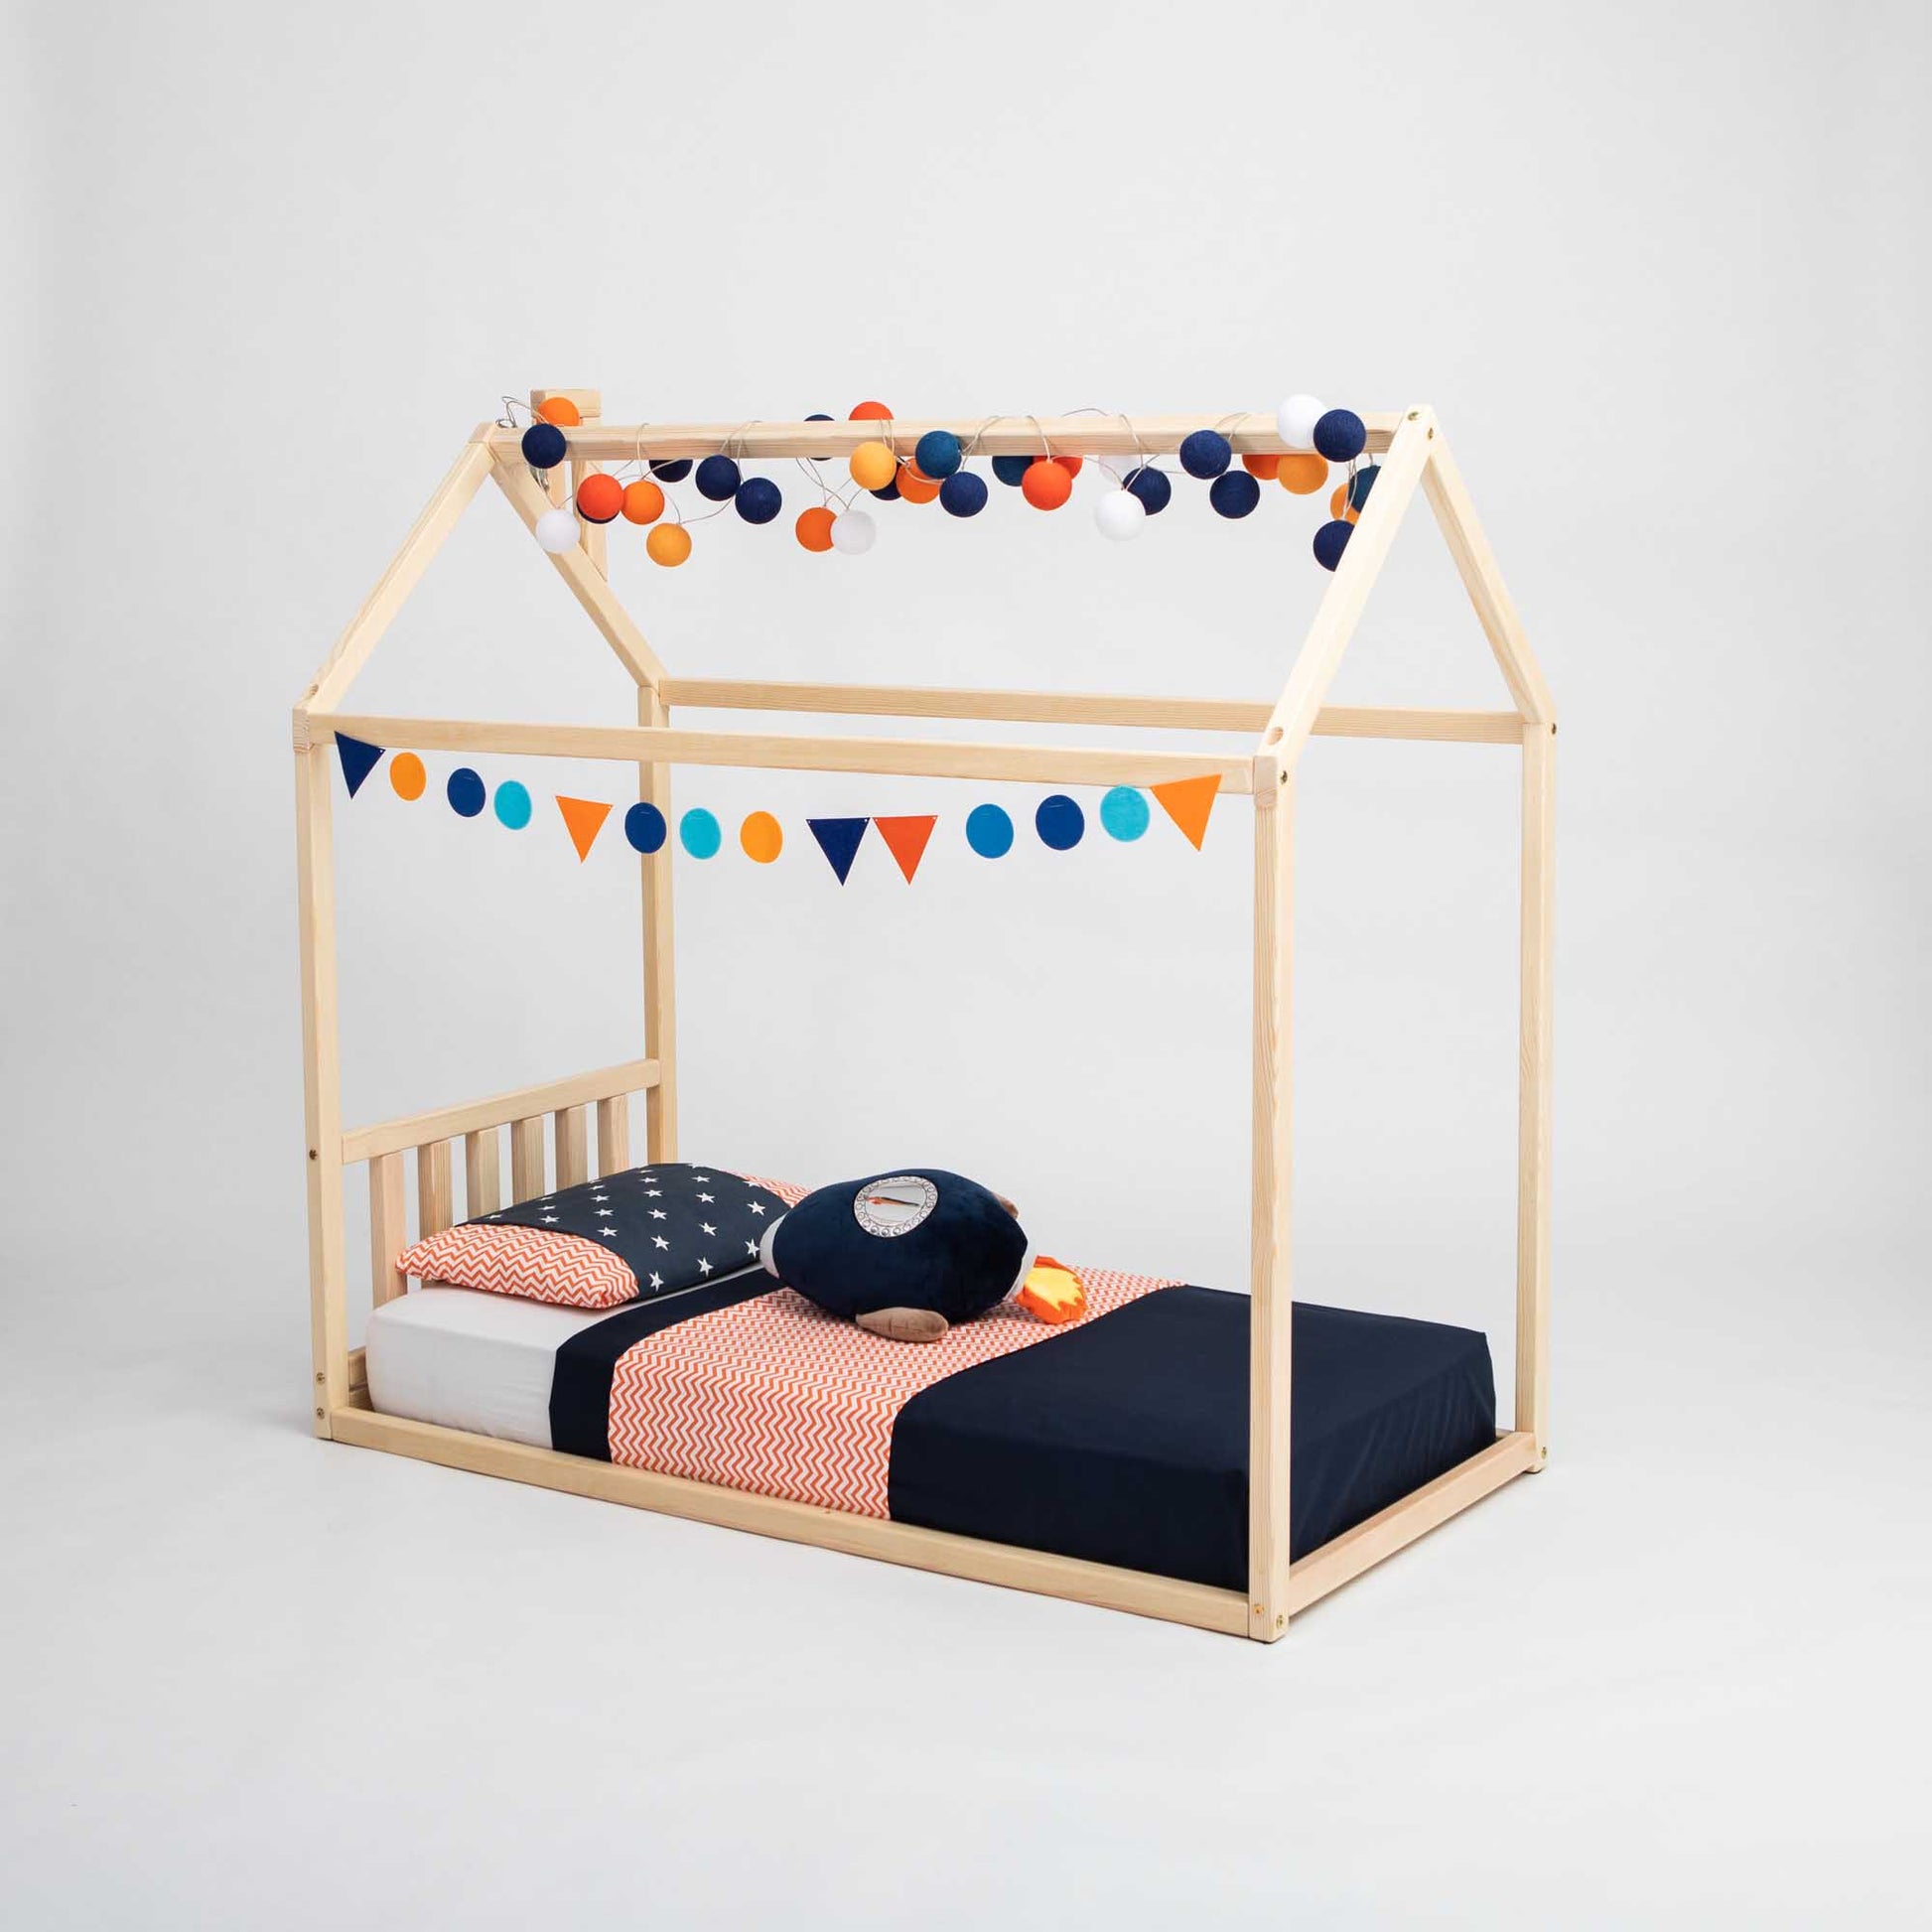 A cozy House-frame bed with a headboard from Sweet Home From Wood, made of wood and adorned with pom poms.